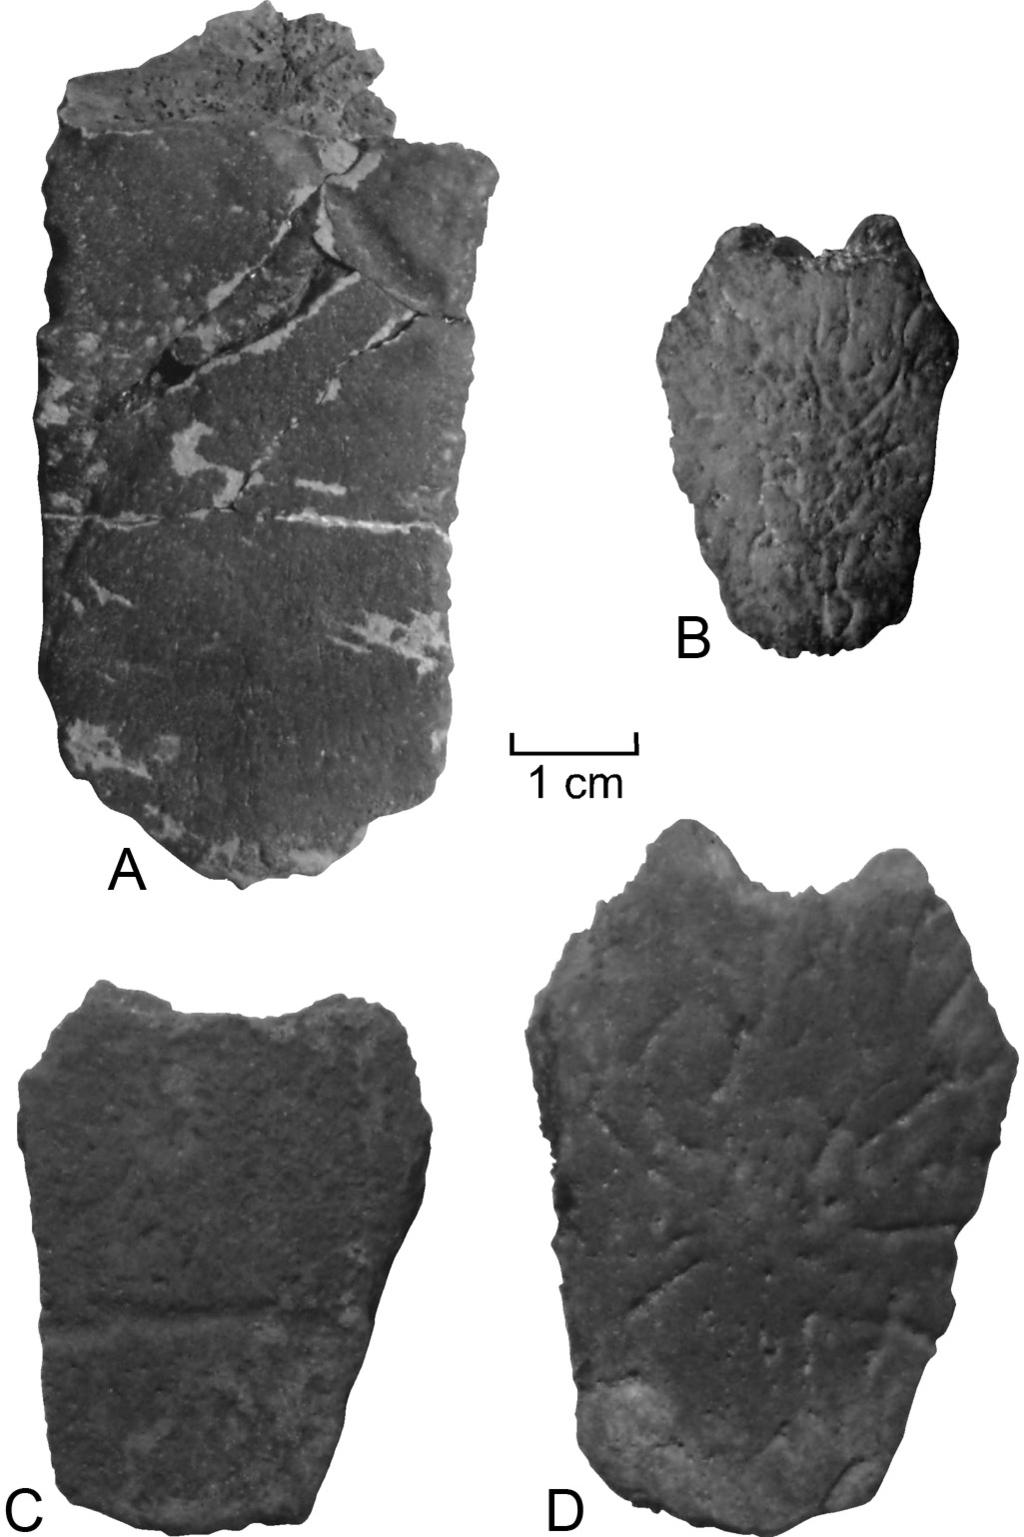 26 PALEOBIOS, VOL. 31, NUMBER 1, MAY 2014 Description Narrow hexagonal-shaped neural with a low longitudinal keel and sculpturing typical of Ashleychelys.